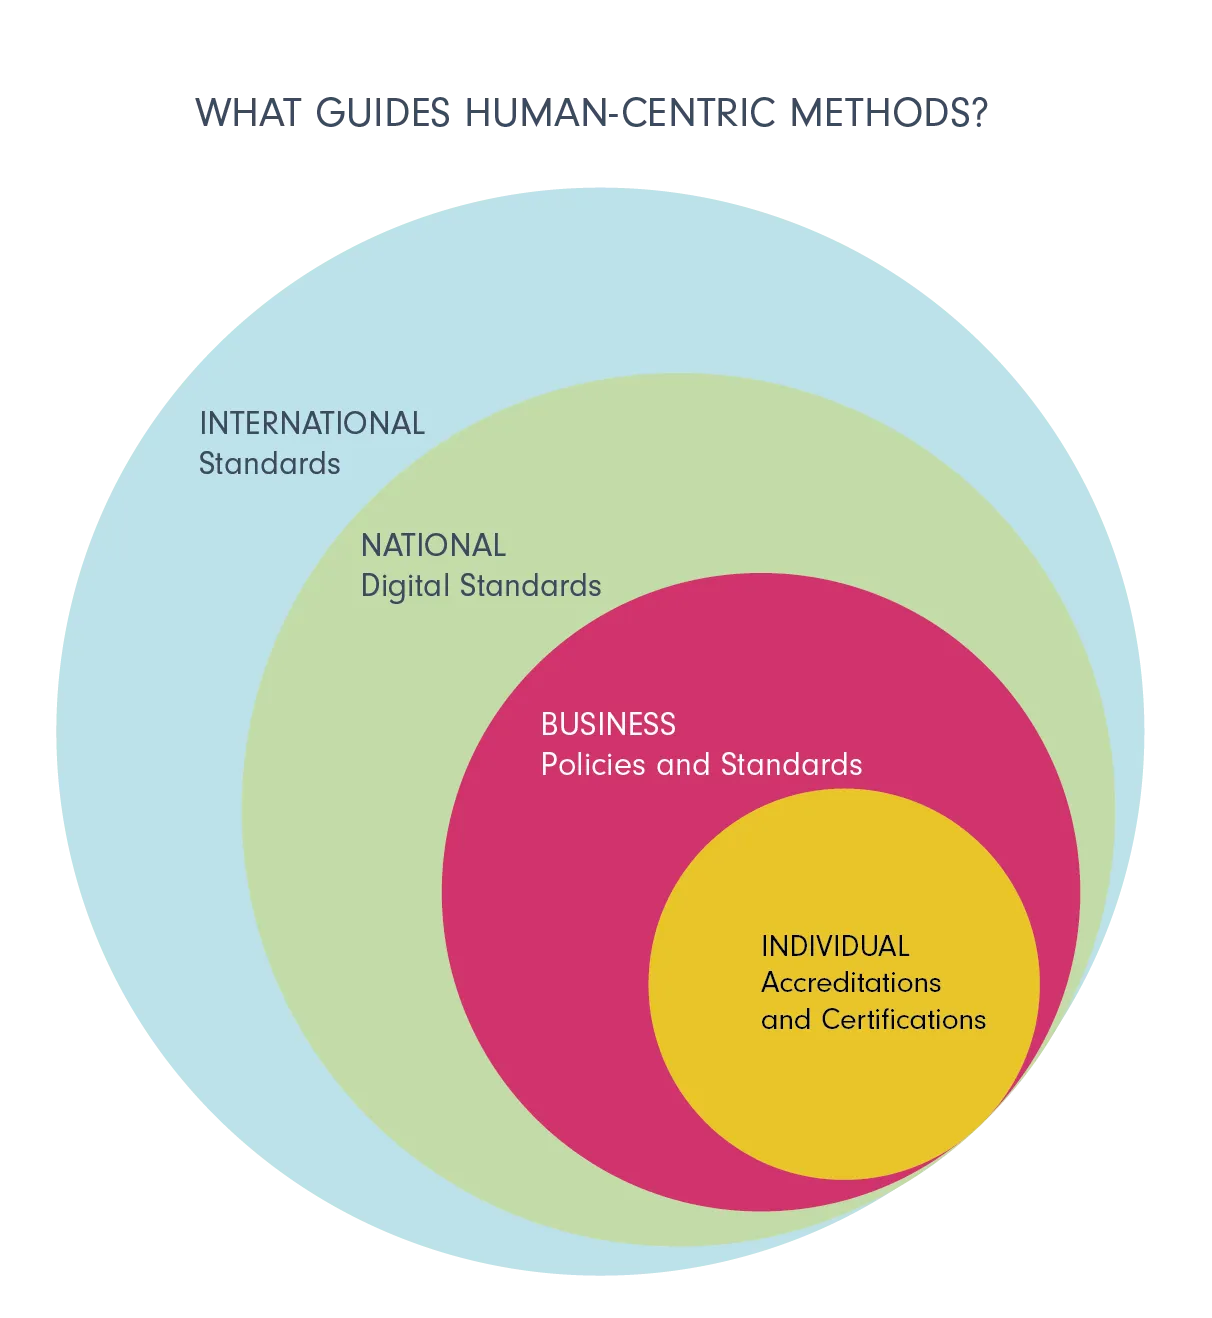 Concentric circles representing the levels of standards and policies starting with the biggest one of international standards, followed by national, business and the smallest circle of individual accreditations and certifications.